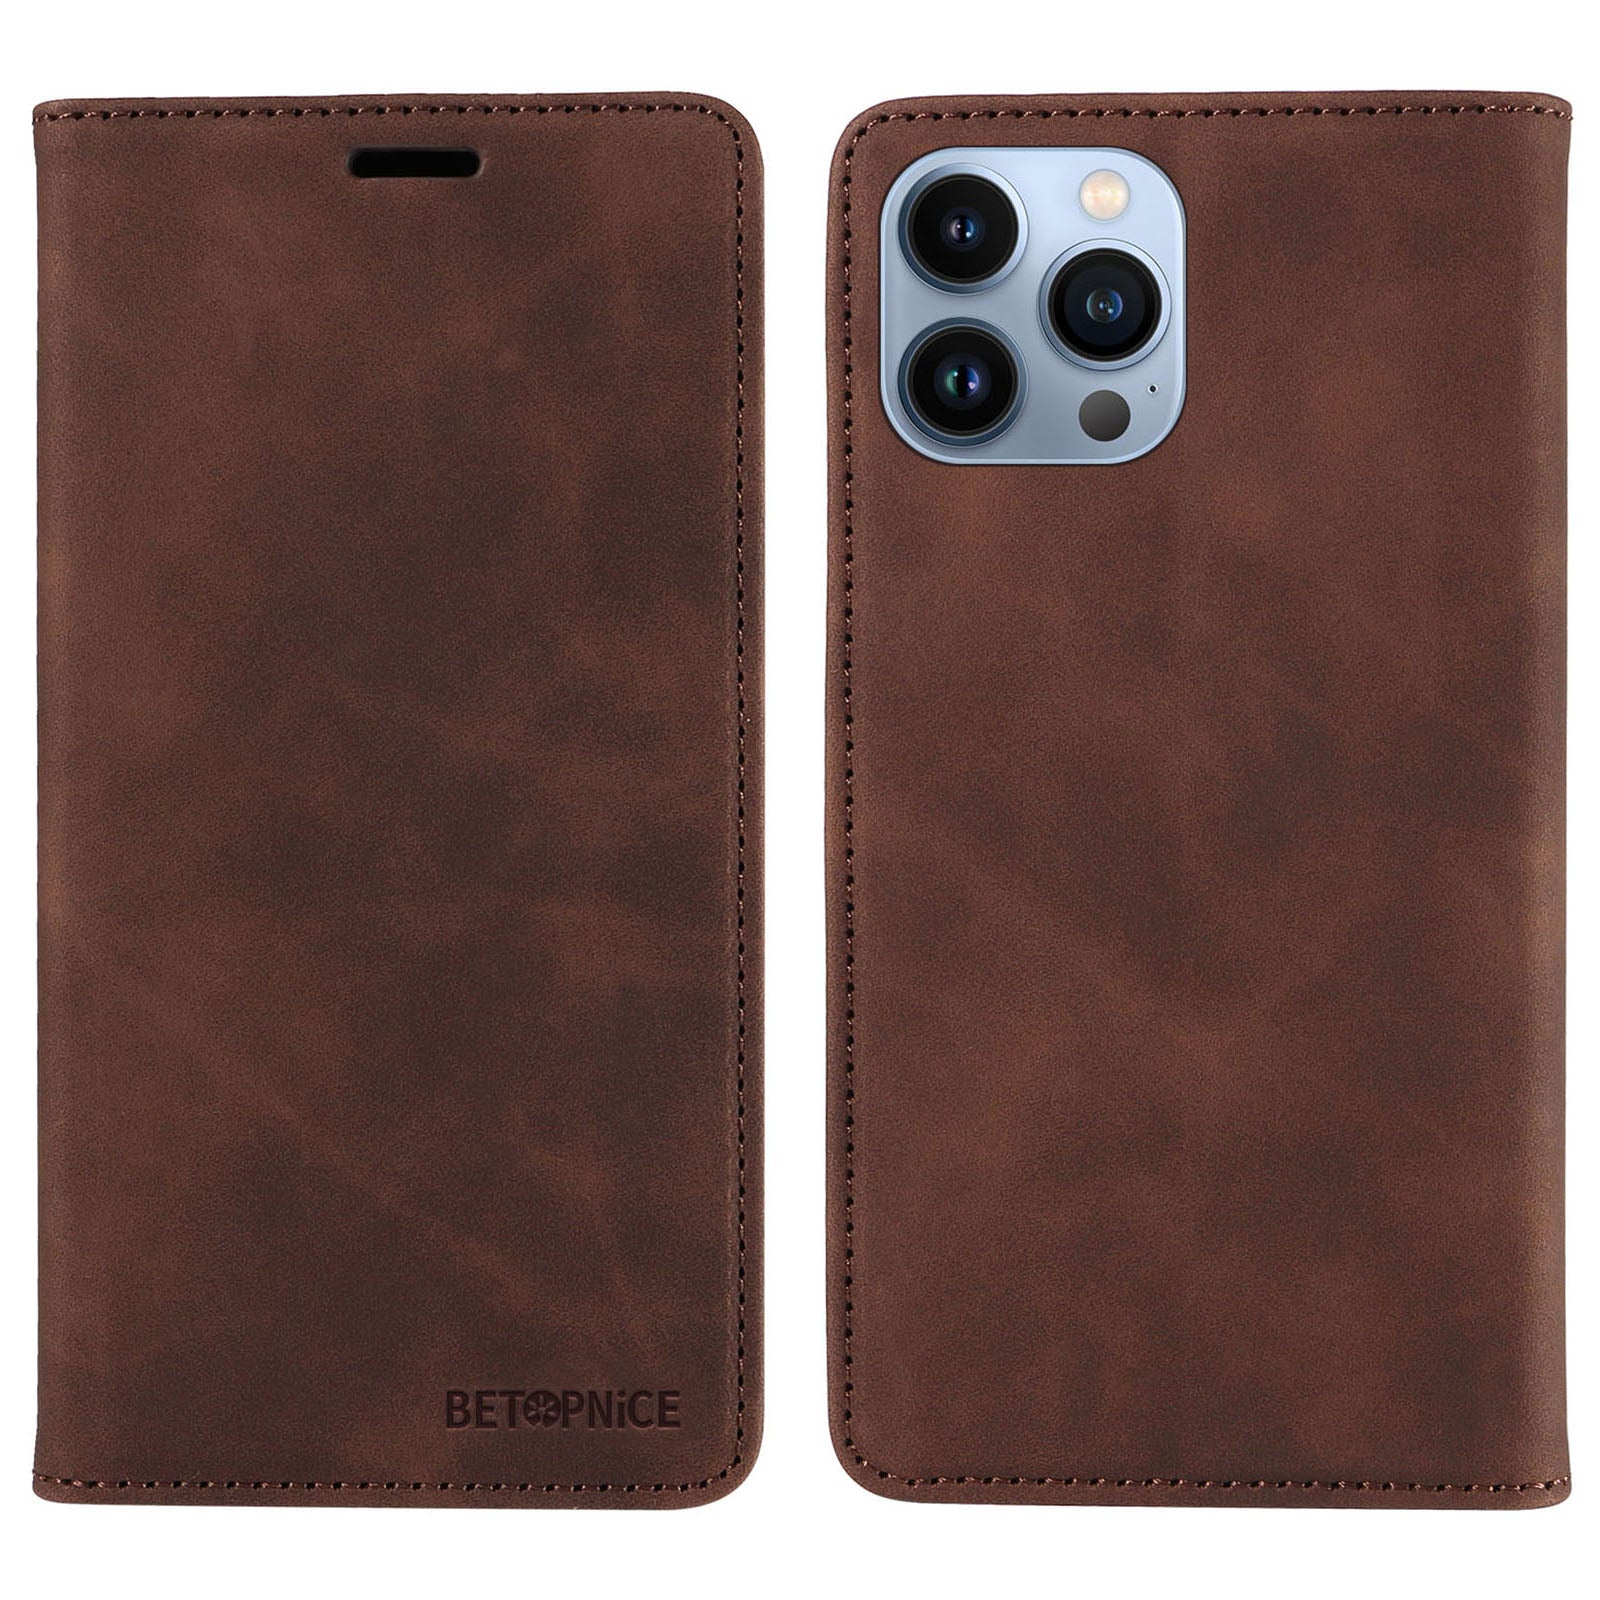 Uniqkart 003 For iPhone 12 Pro Max 6.7 inch Anti-scratch Phone Cover Wallet Leather Stand RFID Blocking Case - Brown